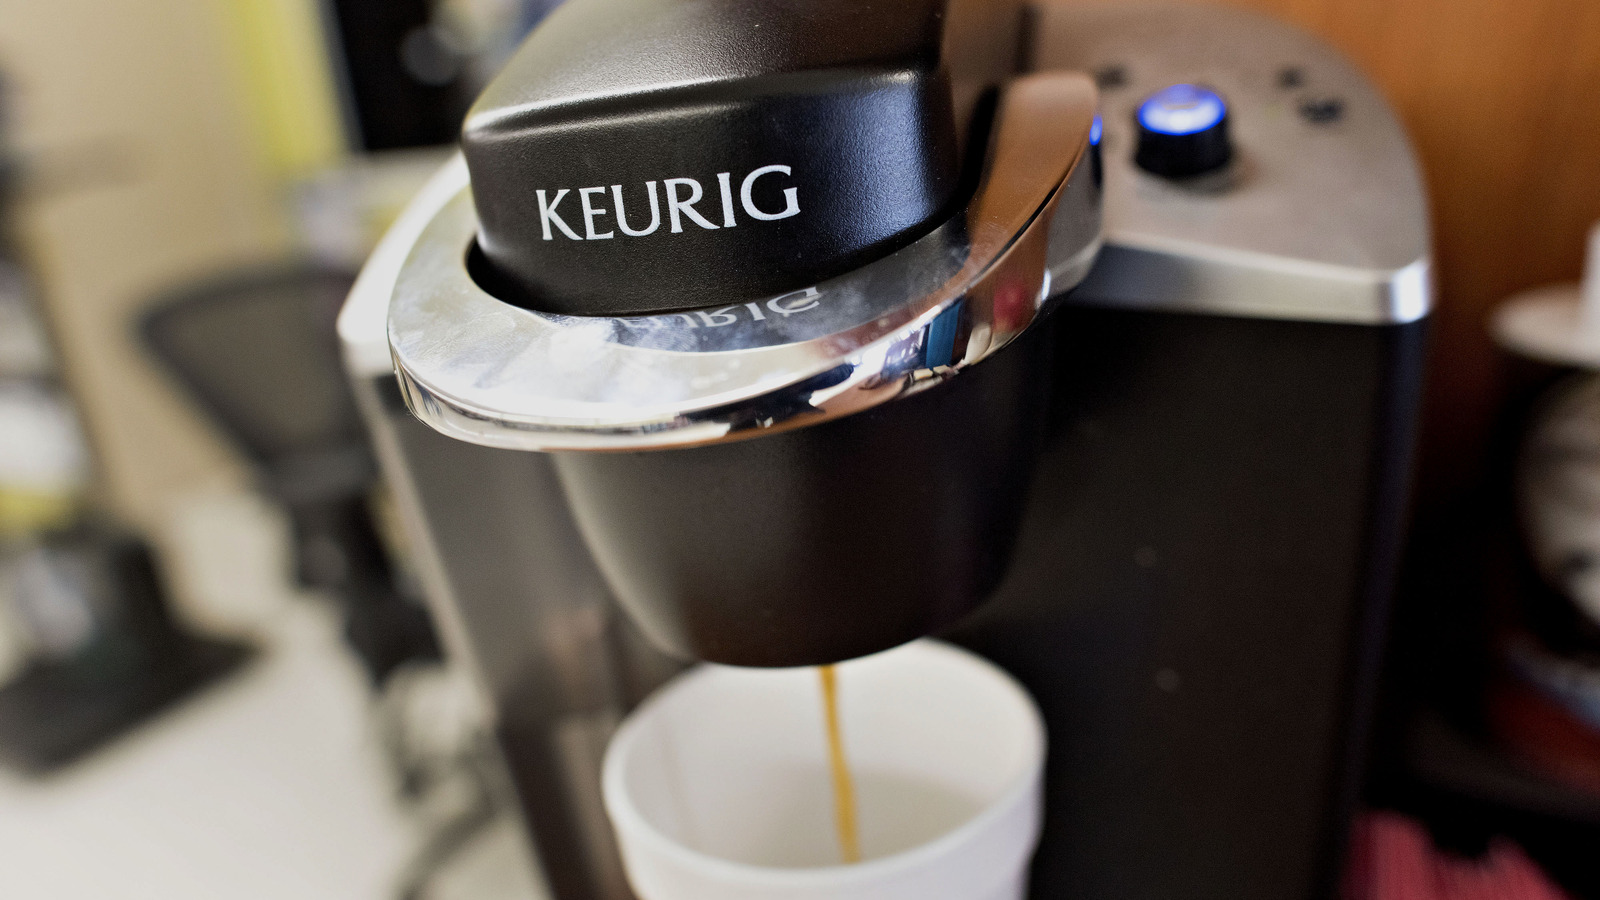 https://www.foodrepublic.com/img/gallery/how-often-to-clean-your-keurig-for-the-best-tasting-coffee/l-intro-1702919125.jpg